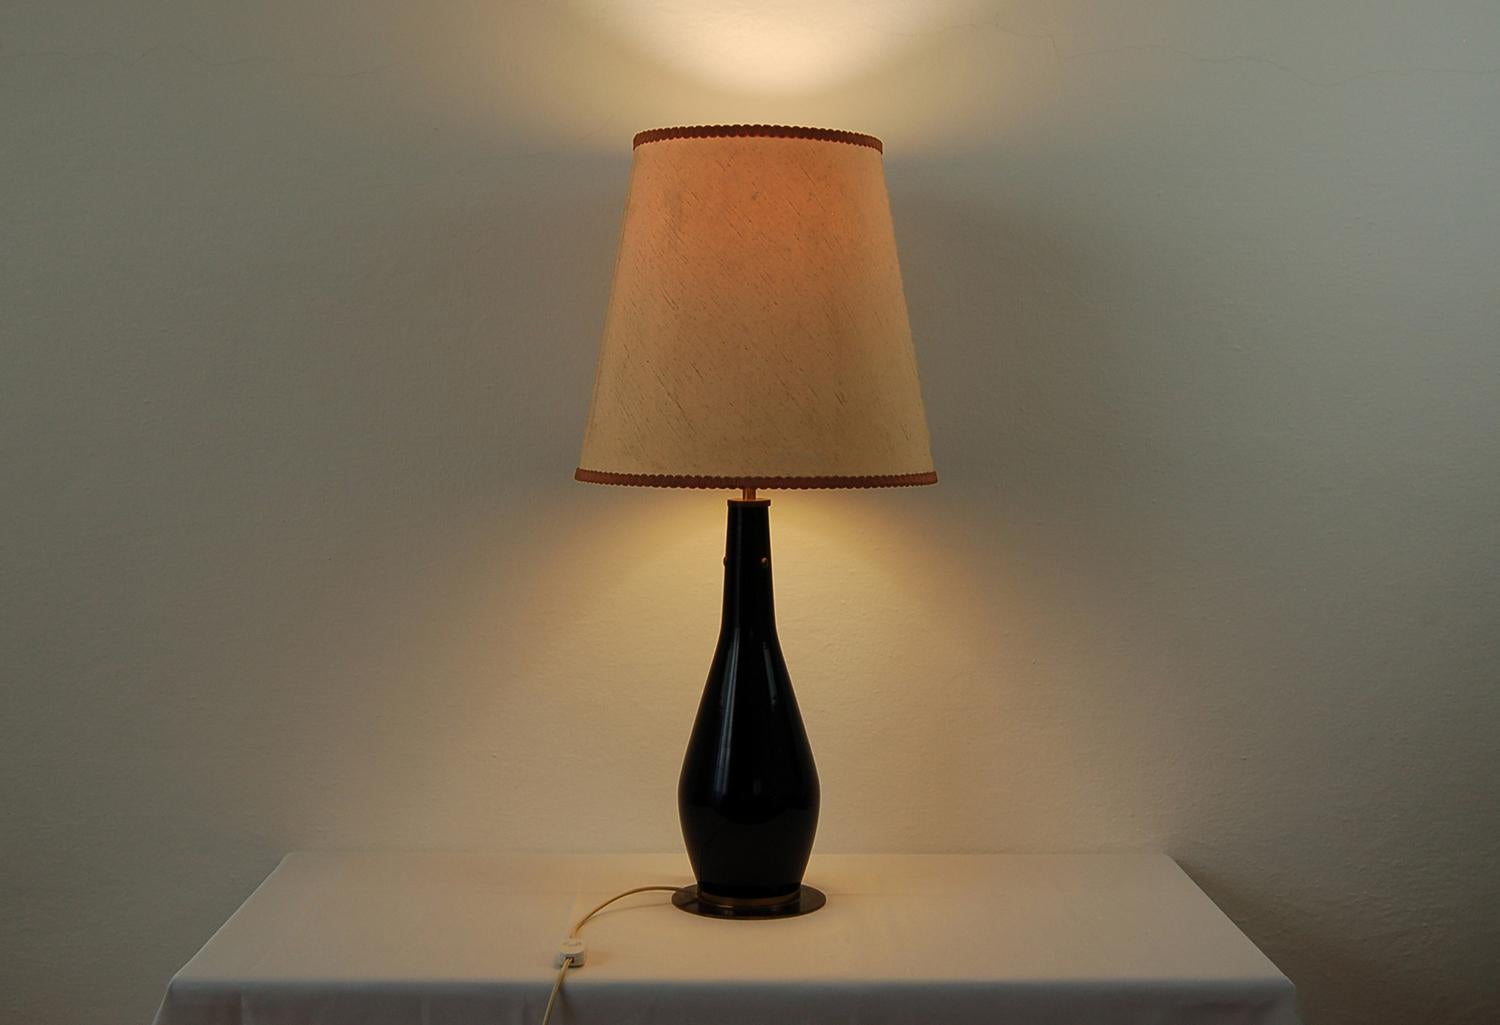 Mid-Century Modern Midcentury Table Lamp in Black Glass and Fabric Lampshade by Stilnovo, 1950s For Sale